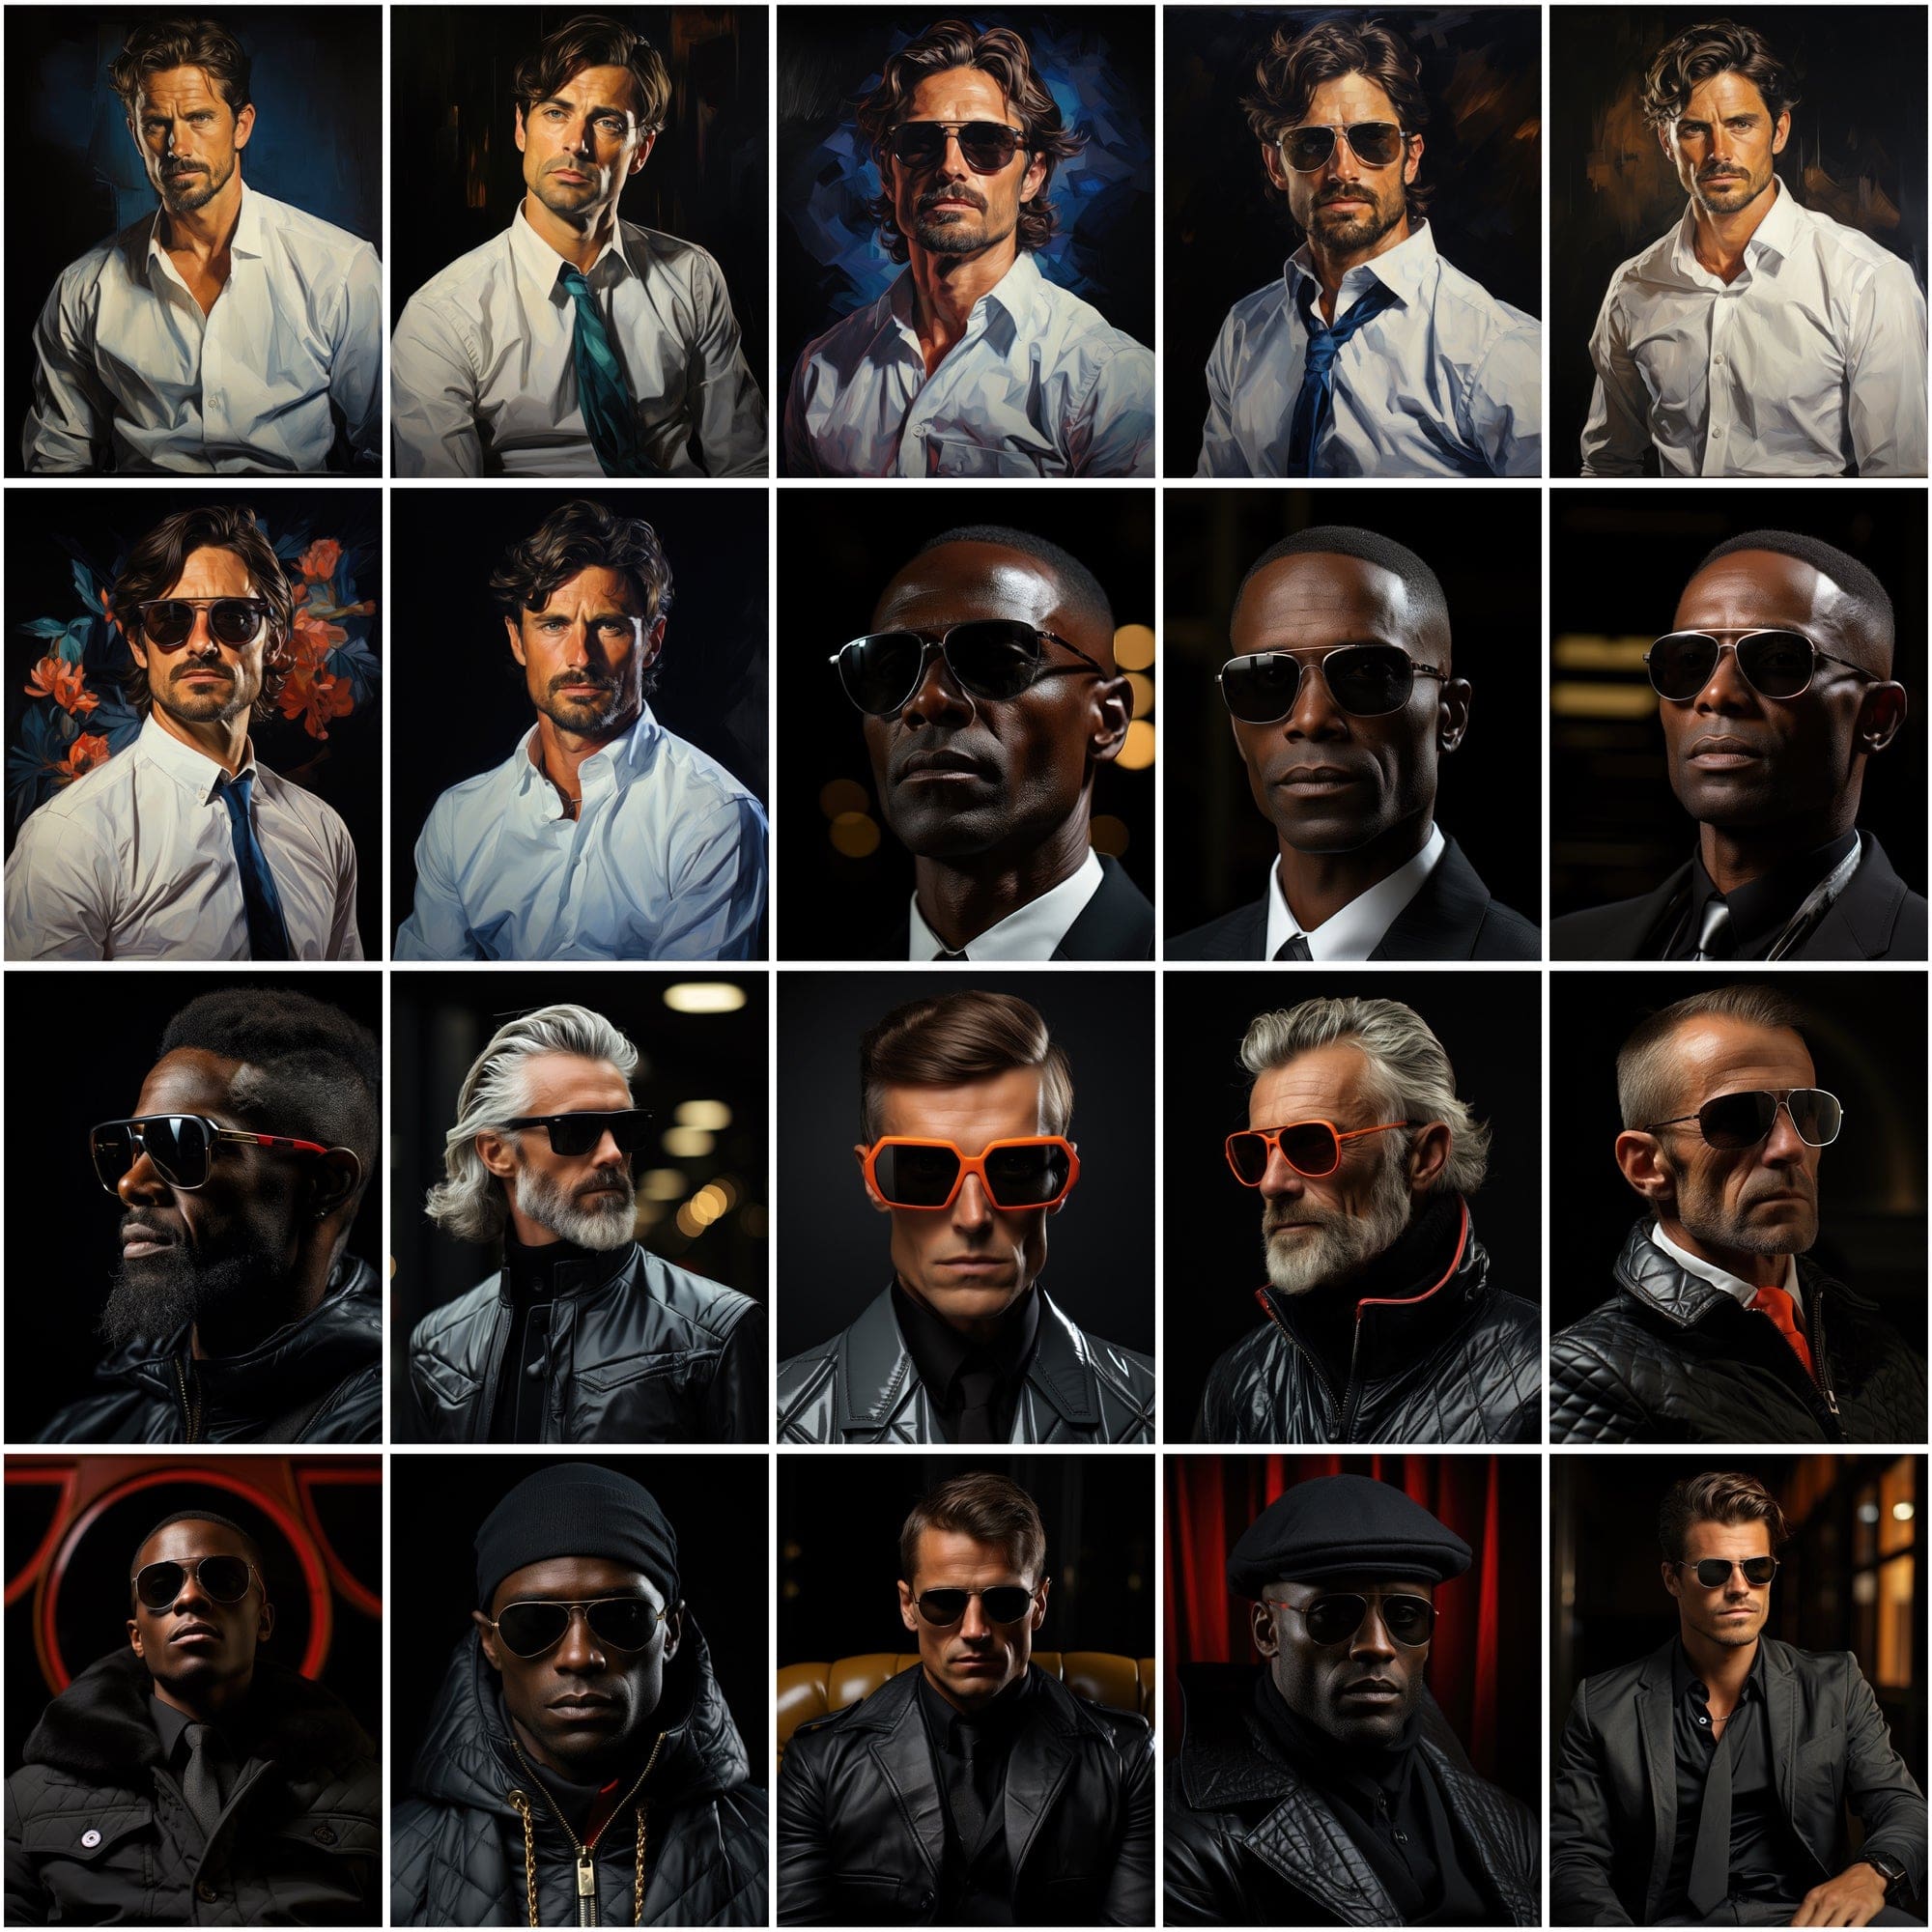 187 Premium PNG Images of Fashionable Men, Colorful High-Resolution Portraits, Commercial License Included Digital Download Sumobundle